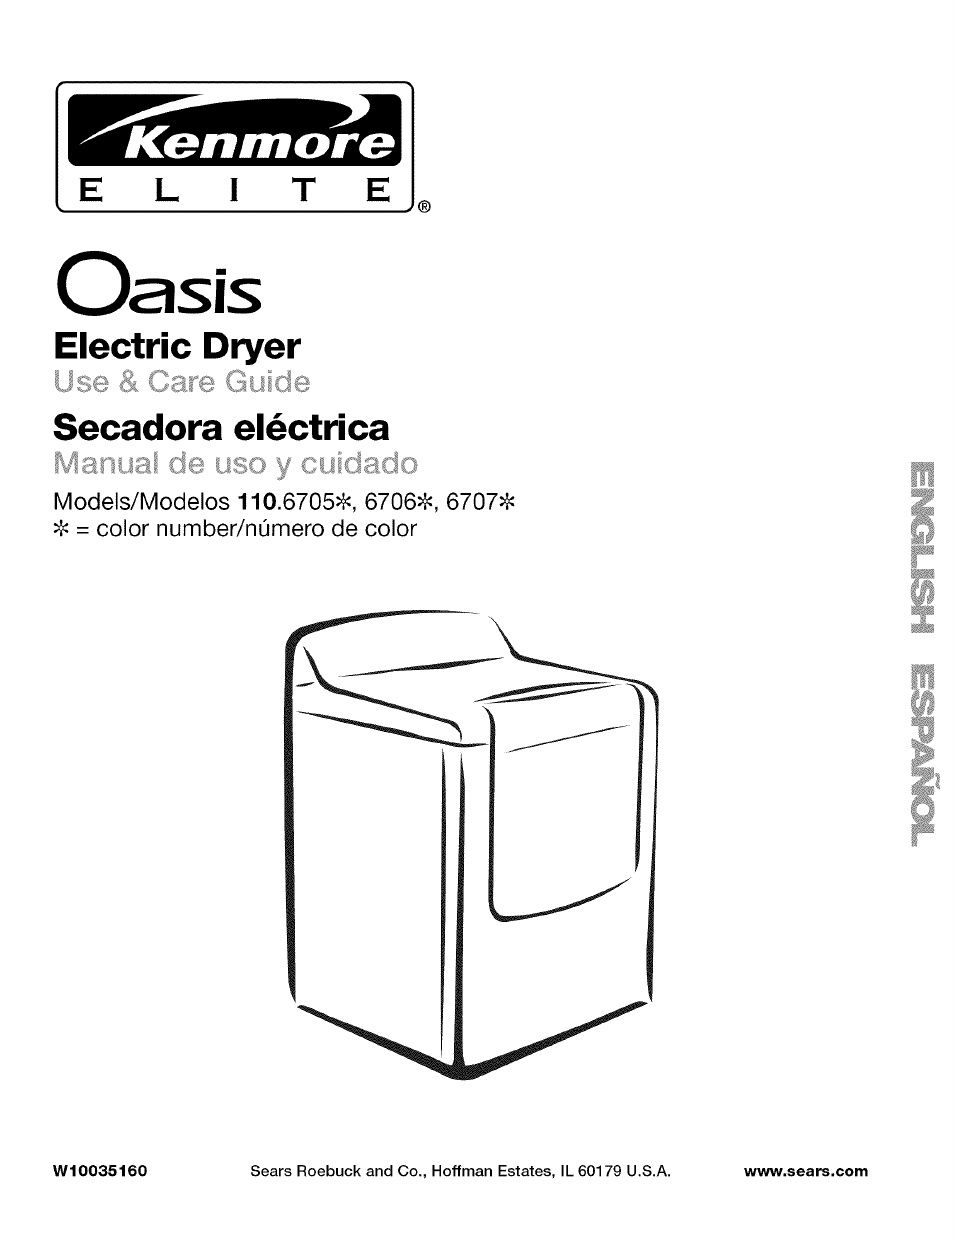 Kenmore ELITE OASIS 110.6707 User Manual | 56 pages | Also for: ELITE OASIS  110.6706, ELITE OASIS 110.6705